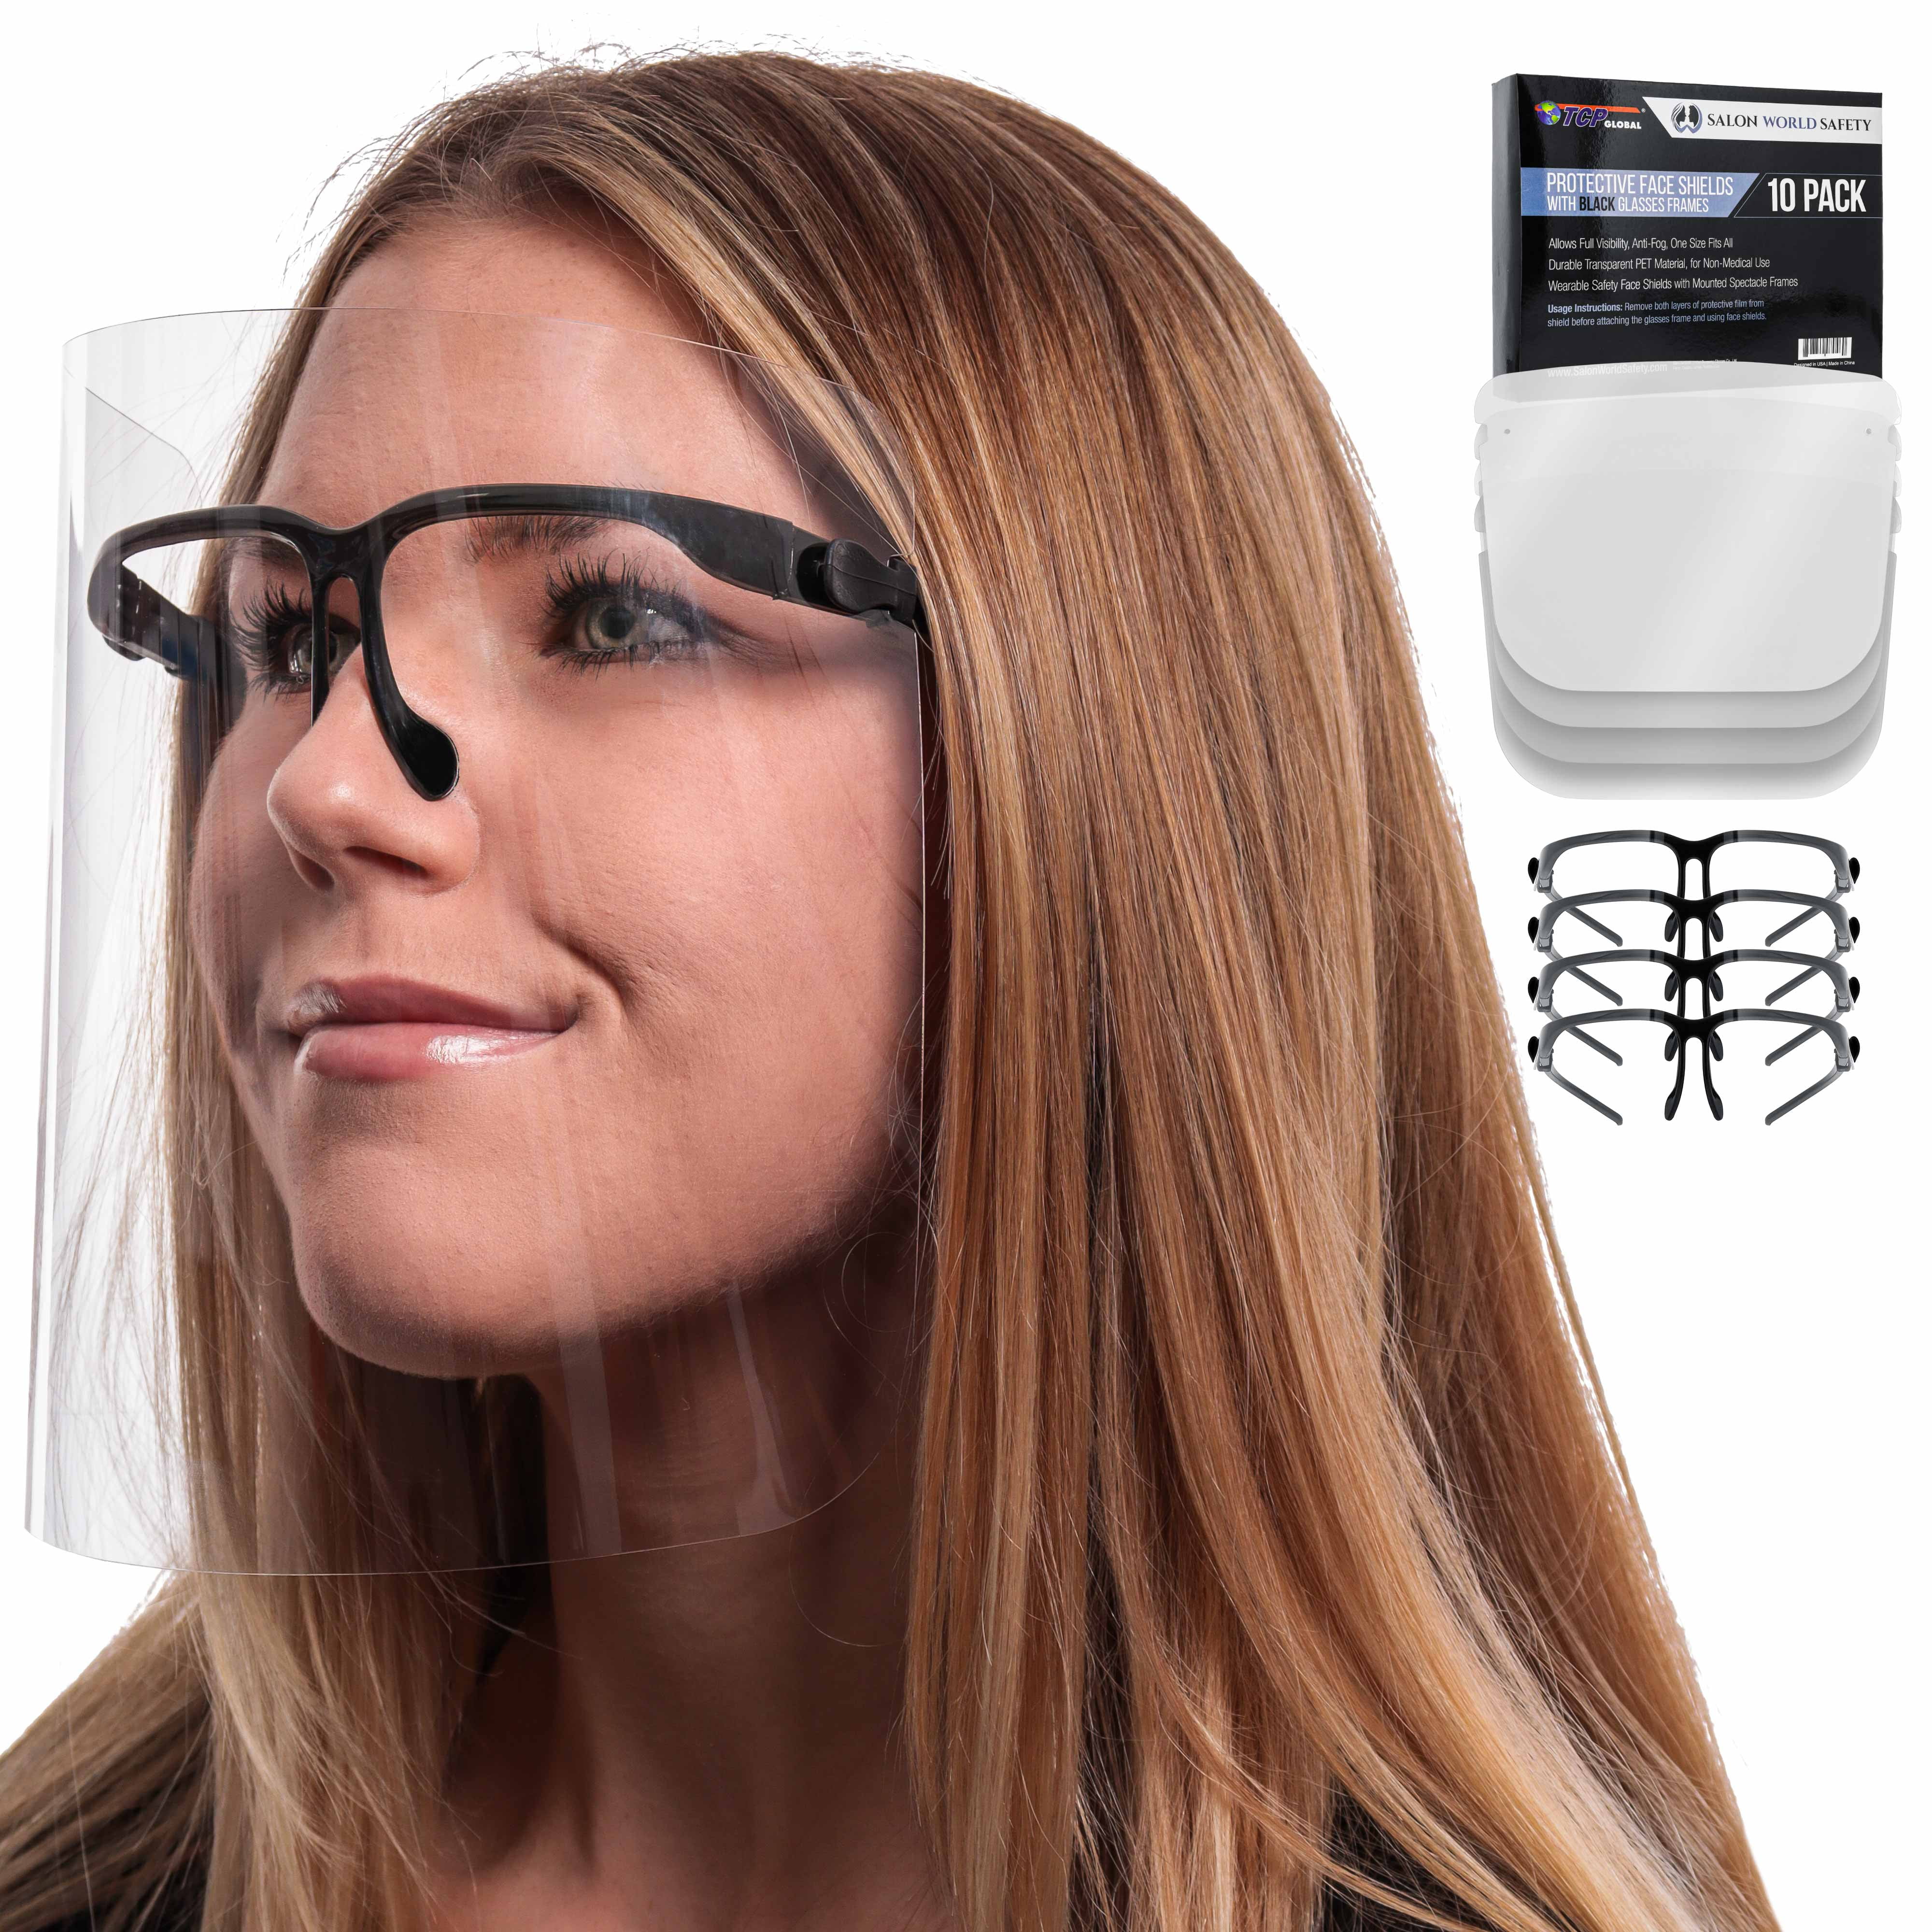 Details about   10X Face Shield Protective Facial Cover Transparent Glasses Visor Anti-Fog Cover 